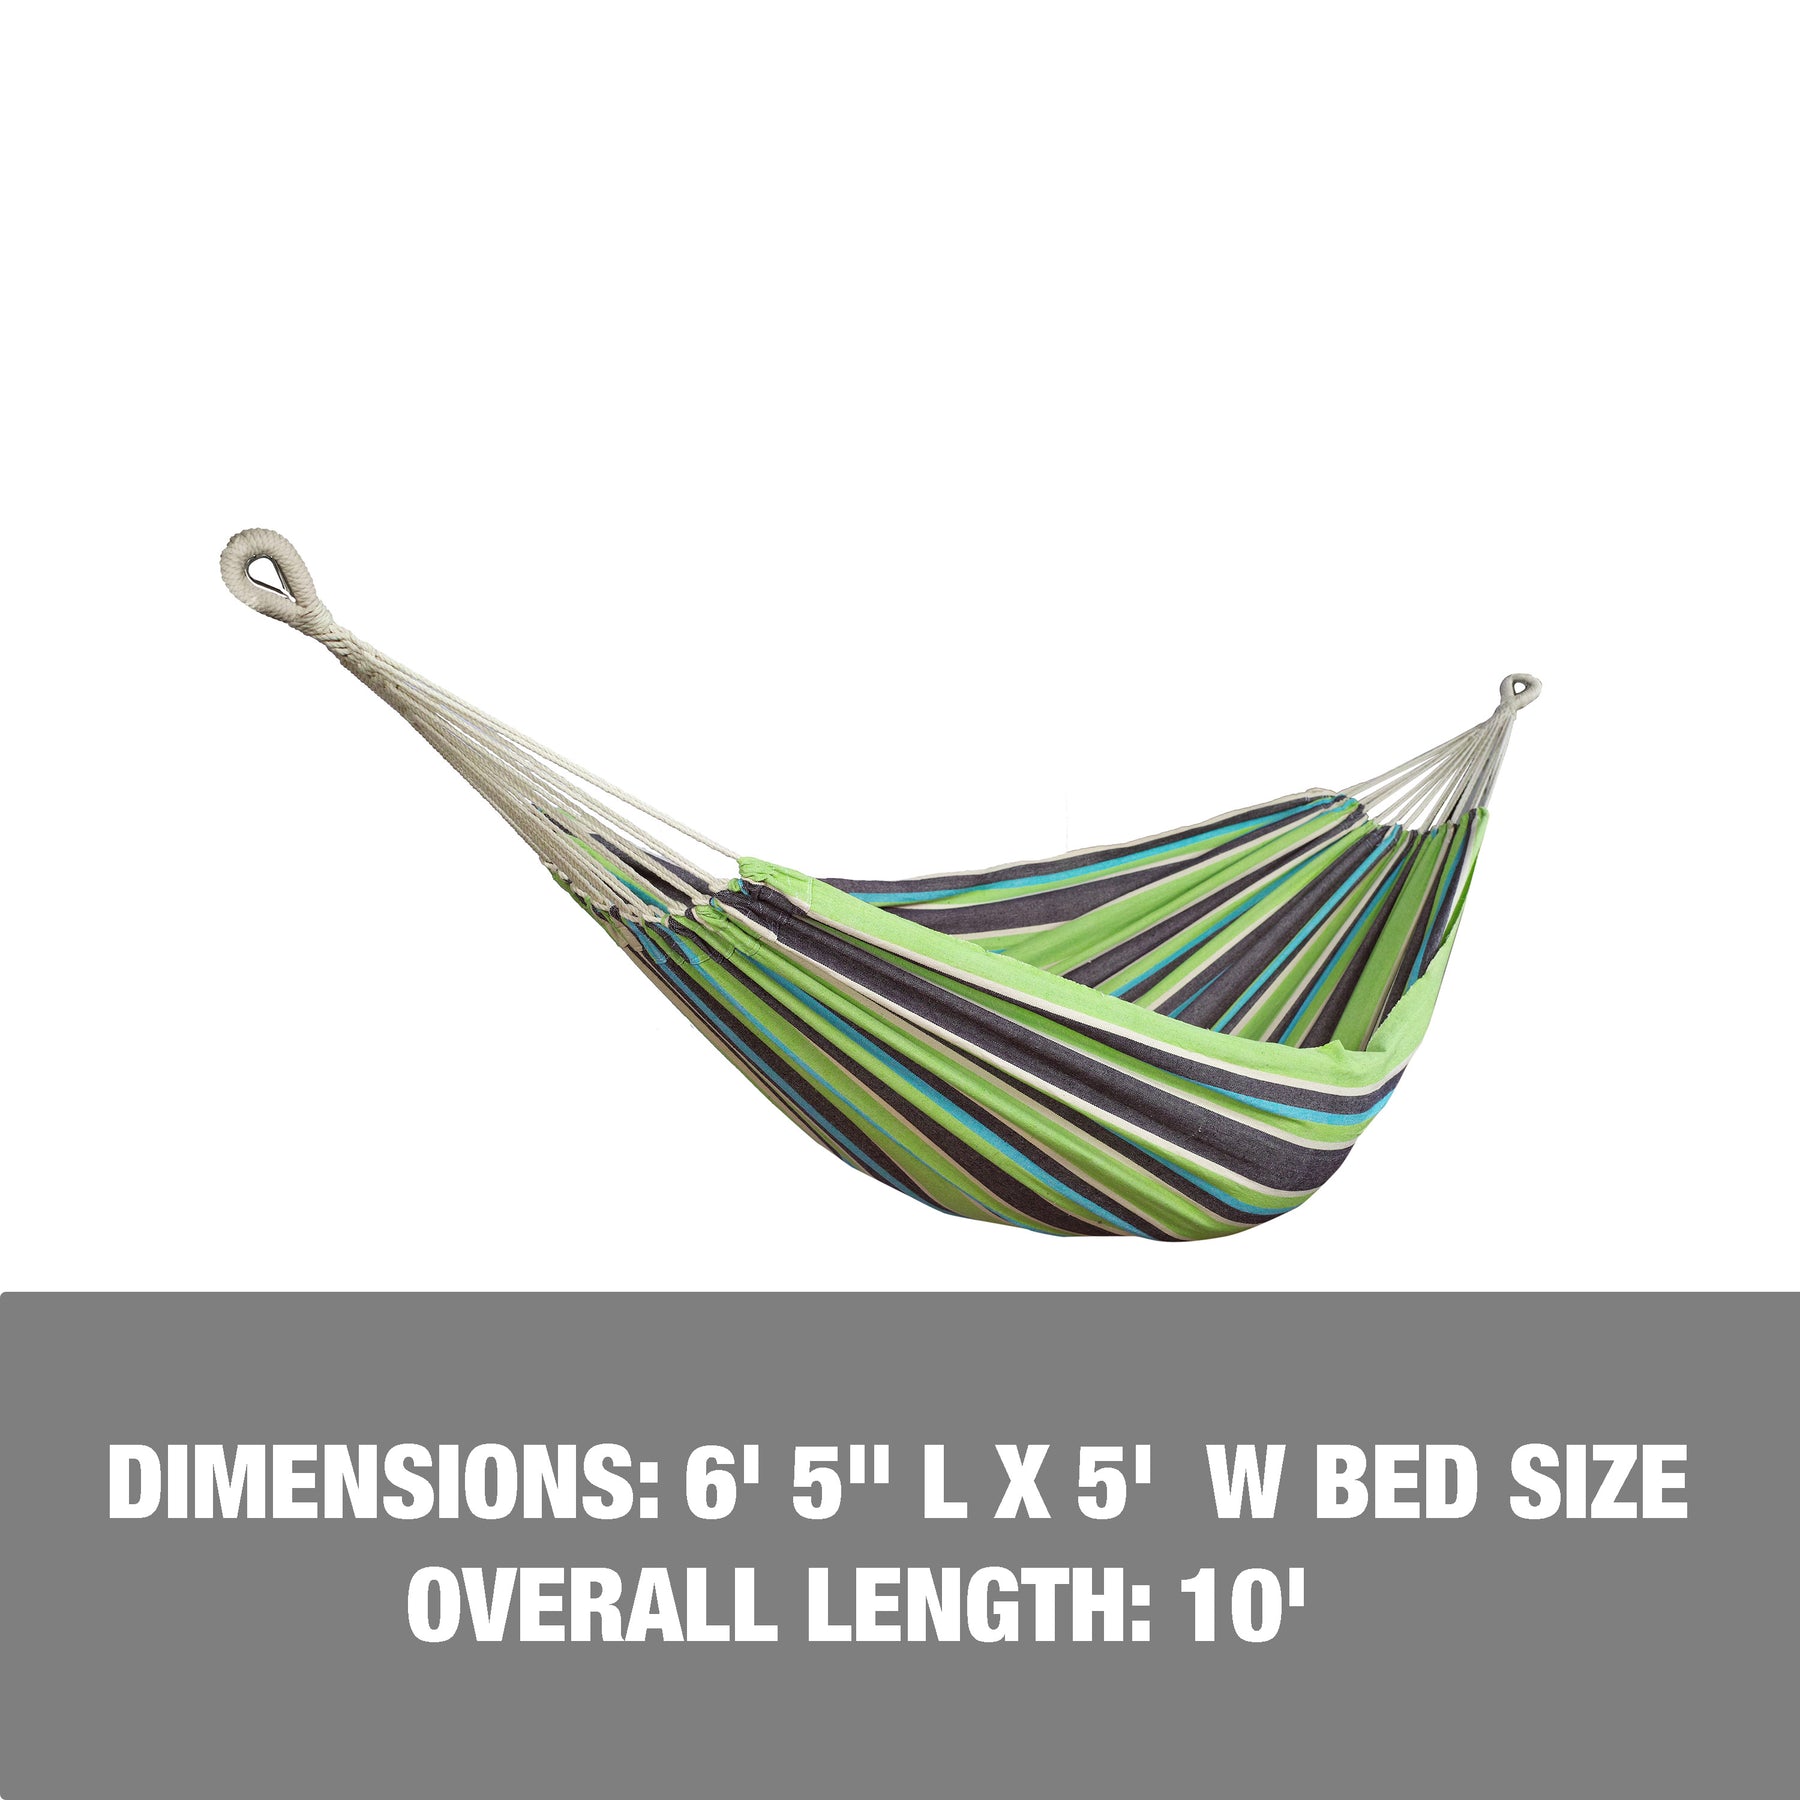 Dimensions: 6 feet 5 inches long, 5 feet wide with an overall length of 10 feet.